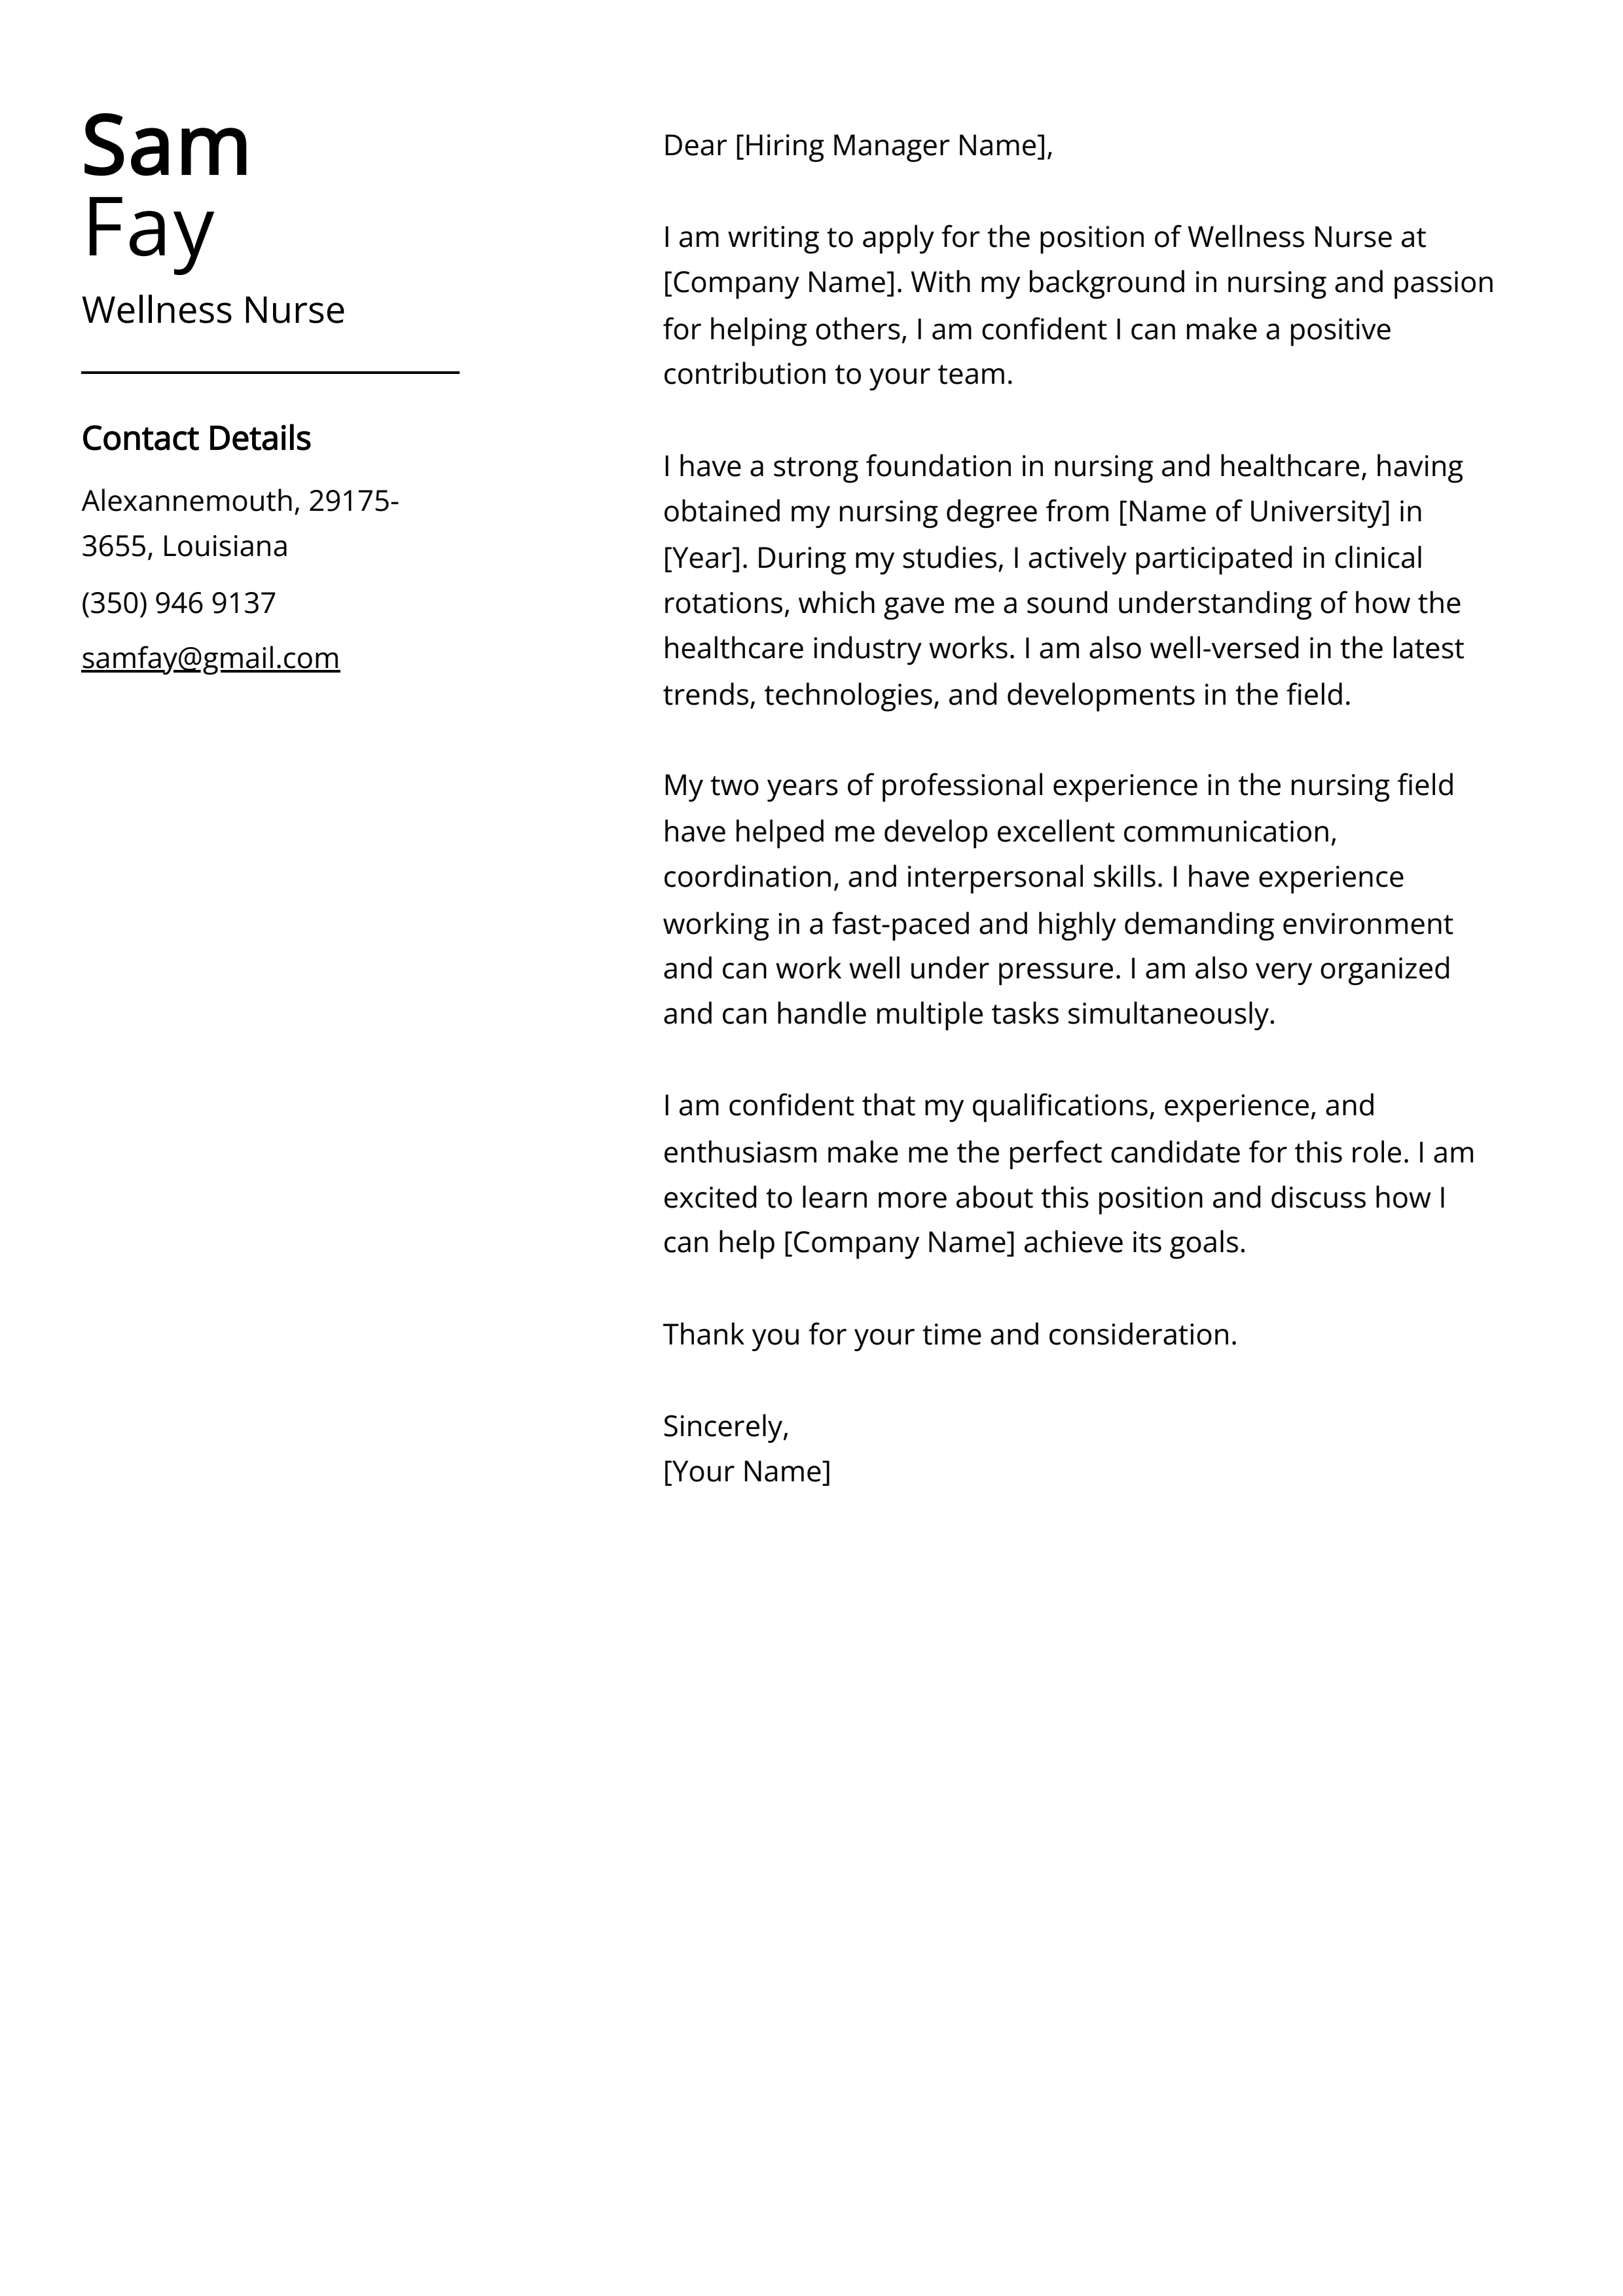 Wellness Nurse Cover Letter Example